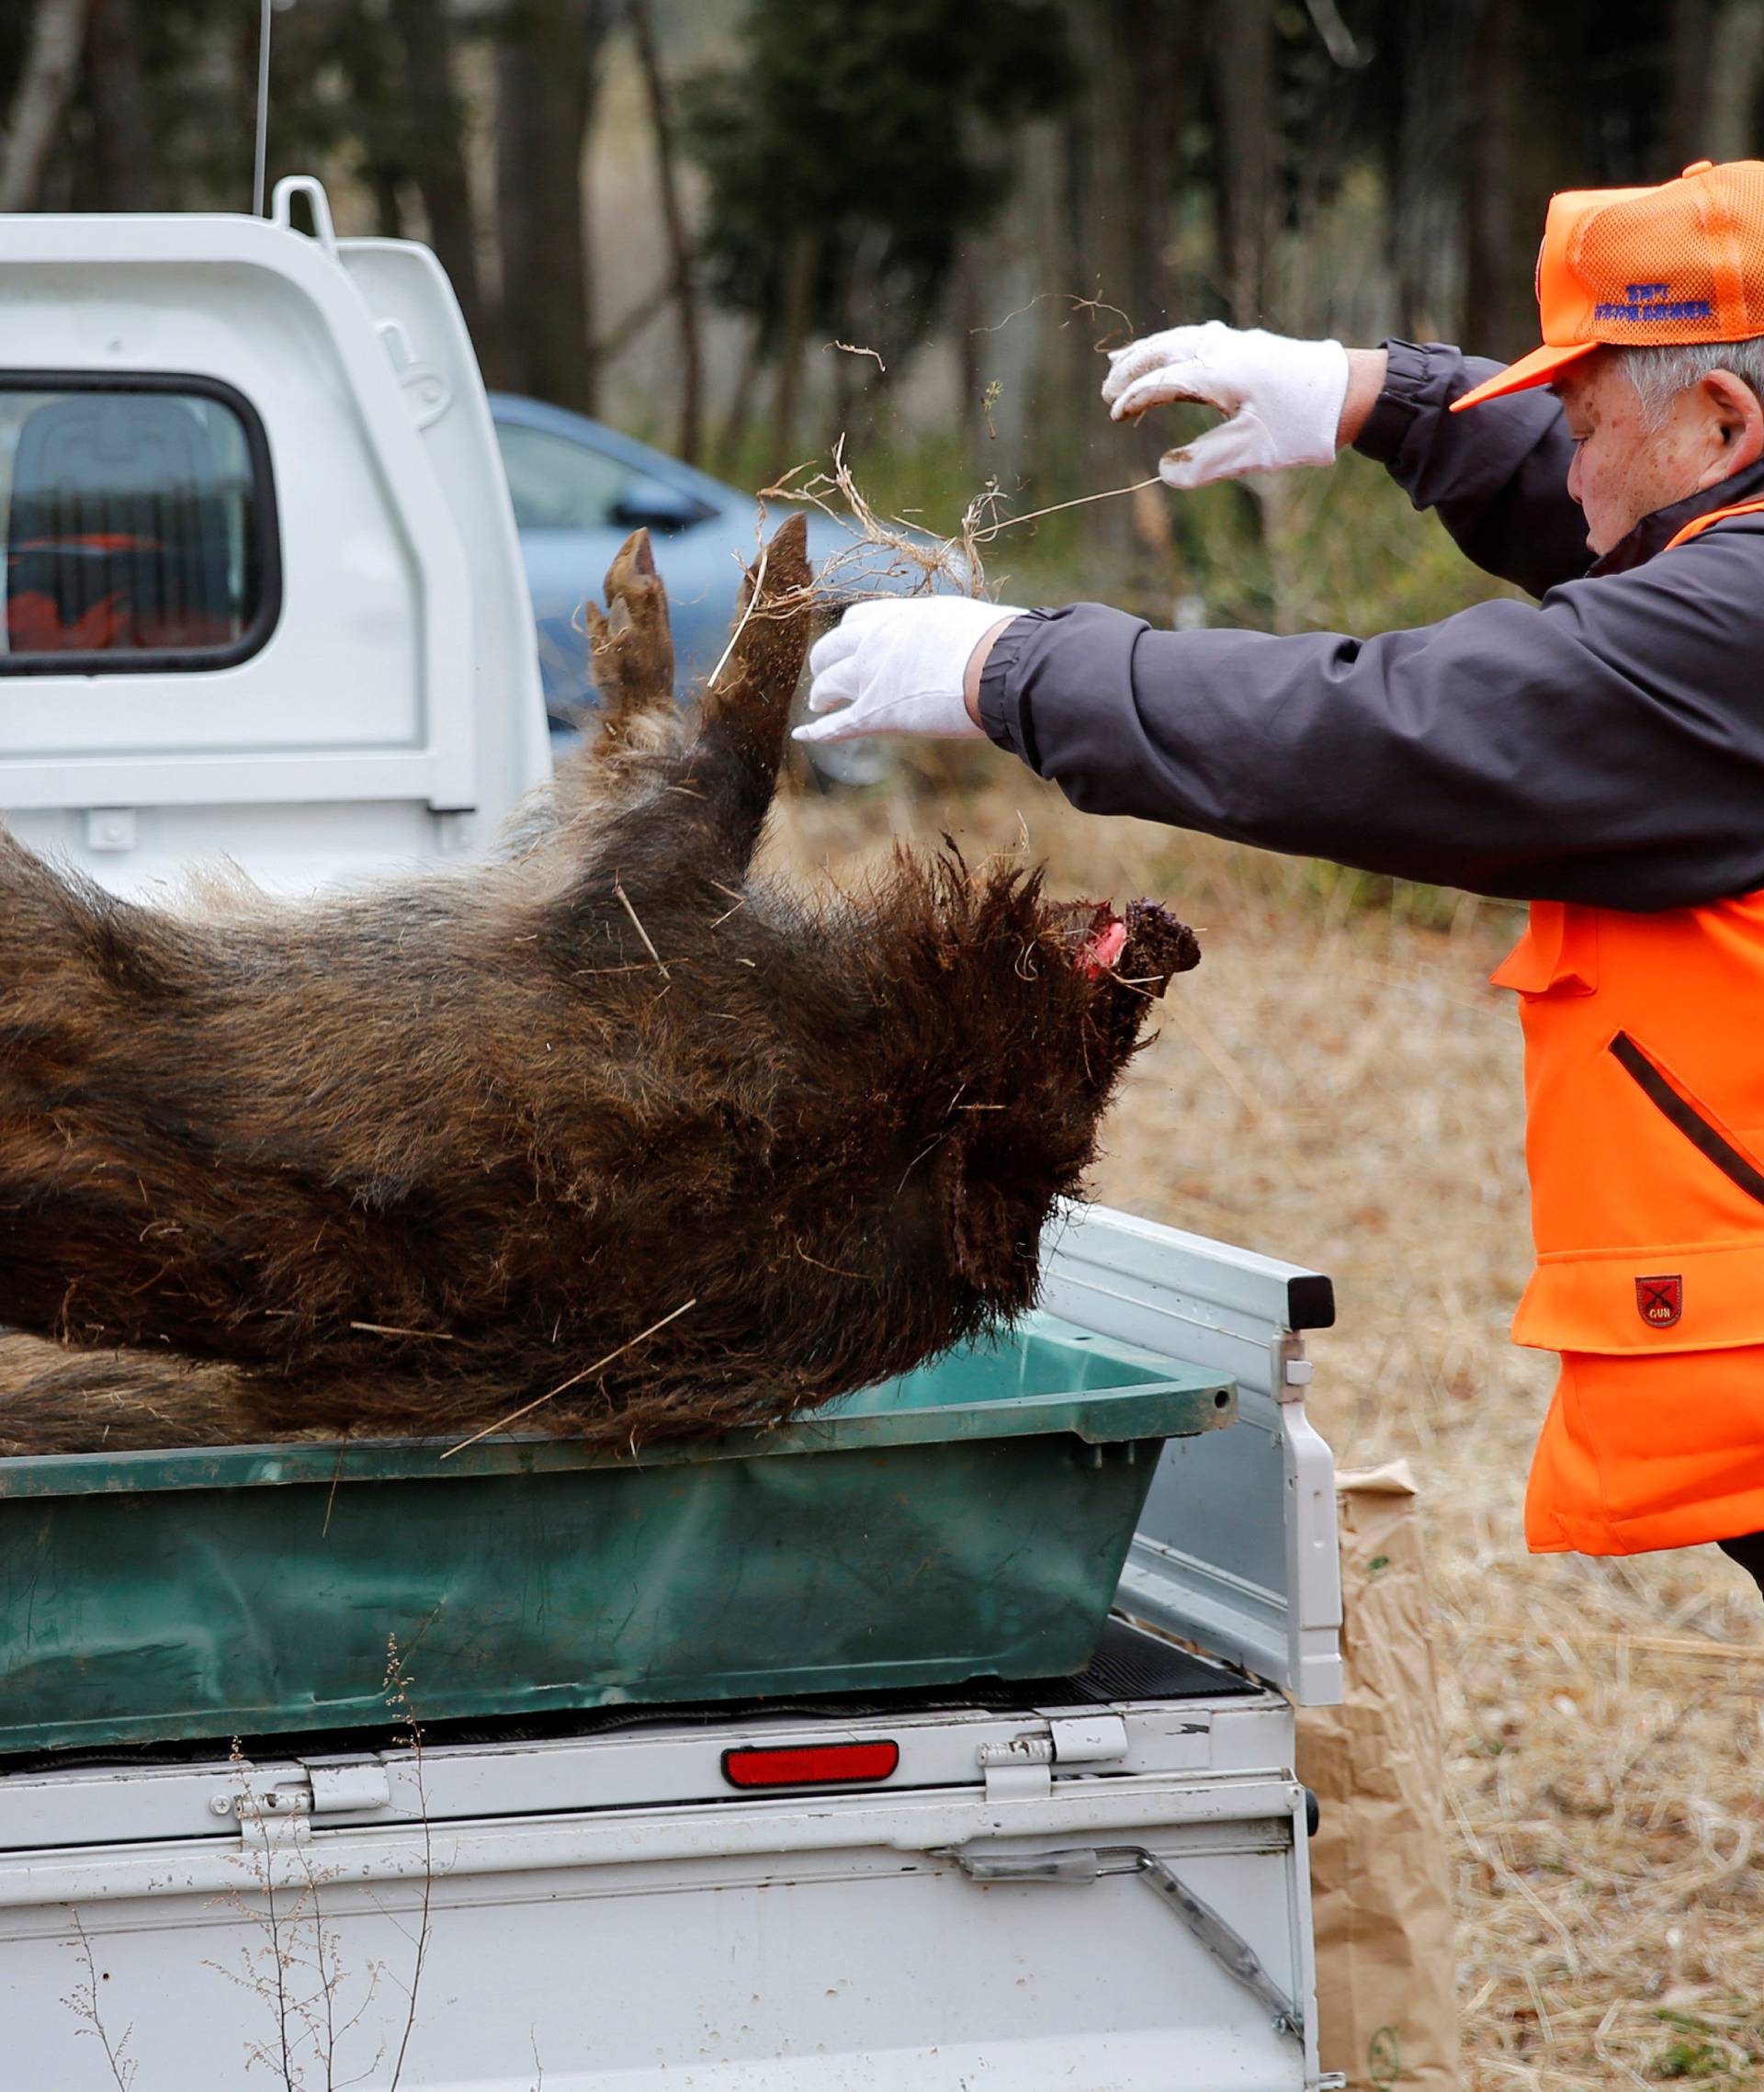 Members of Tomioka Town's animal control hunters group carry a wild boar which killed by a pellet gun in a booby trap, at a residential area in an evacuation zone near TEPCO's tsunami-crippled Fukushima Daiichi nuclear power plant in Tomioka town